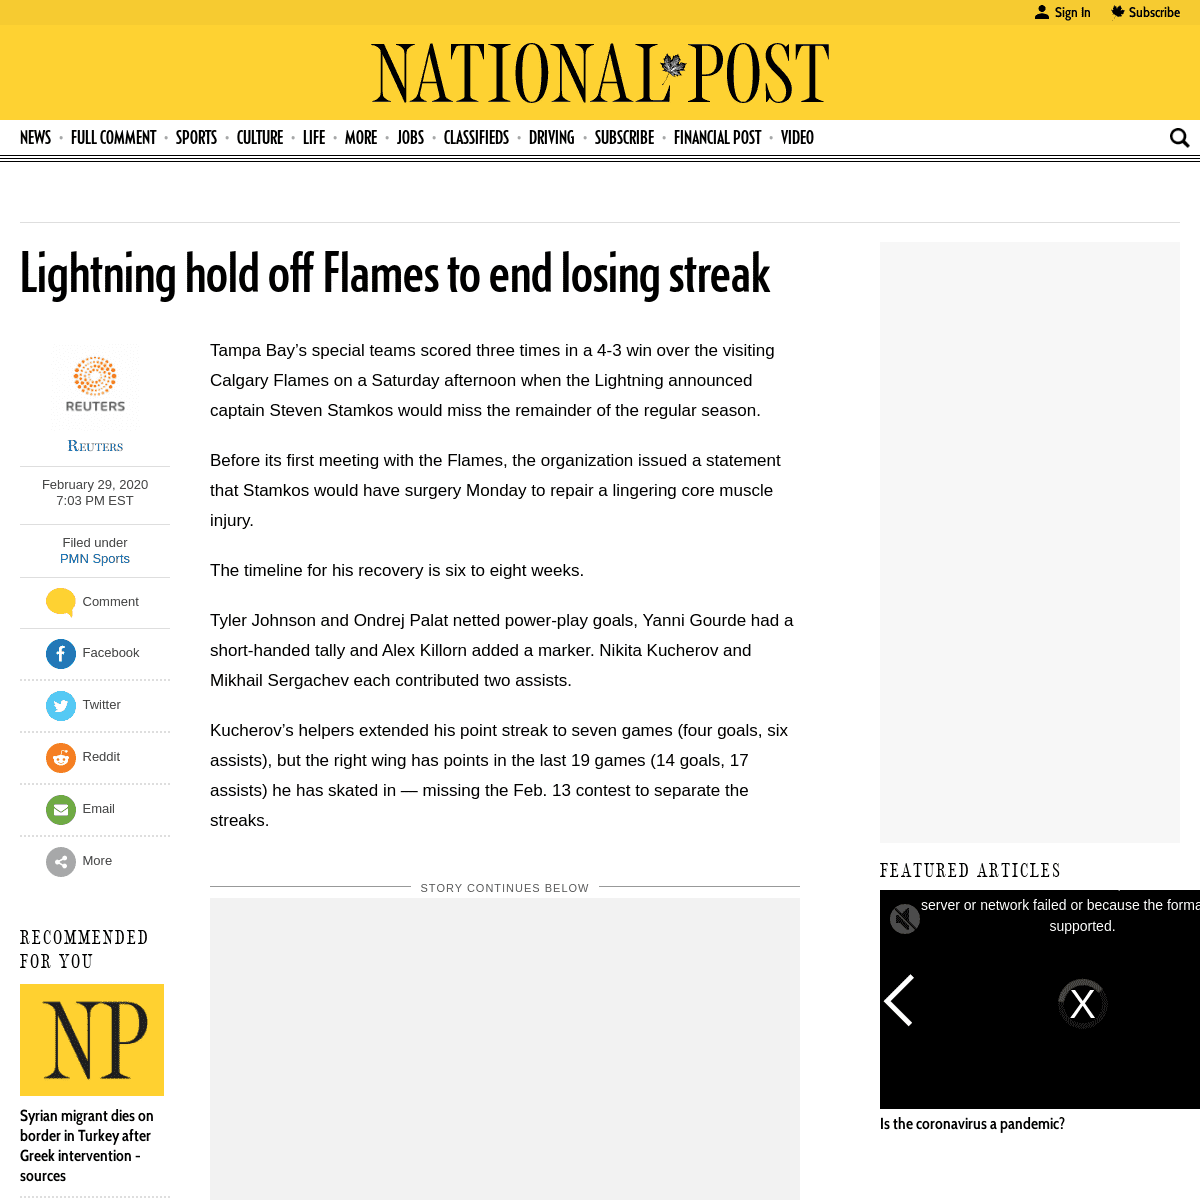 A complete backup of nationalpost.com/pmn/sports-pmn/lightning-hold-off-flames-to-end-losing-streak